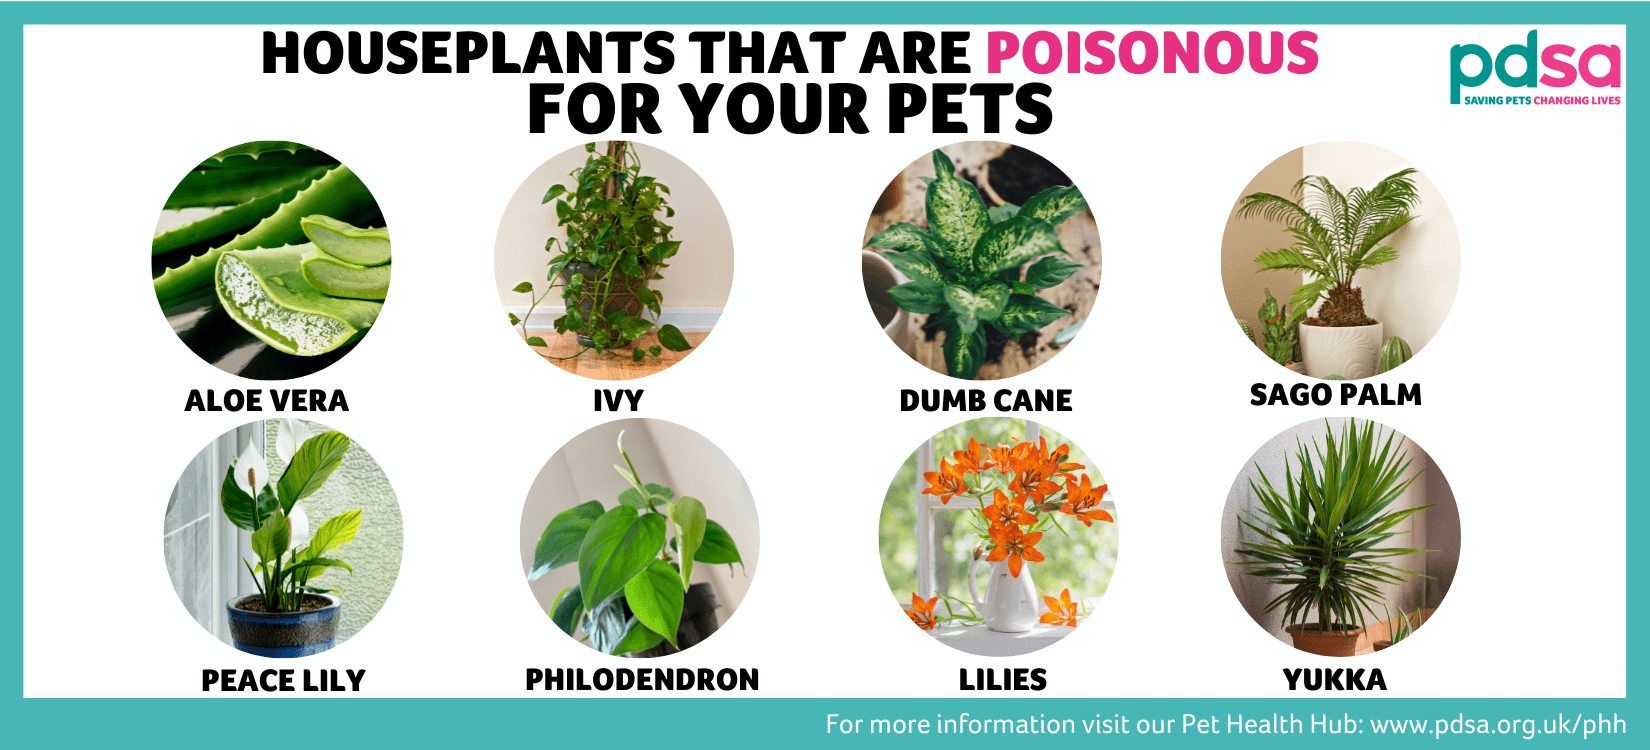 are geraniums poisonous to cats and dogs